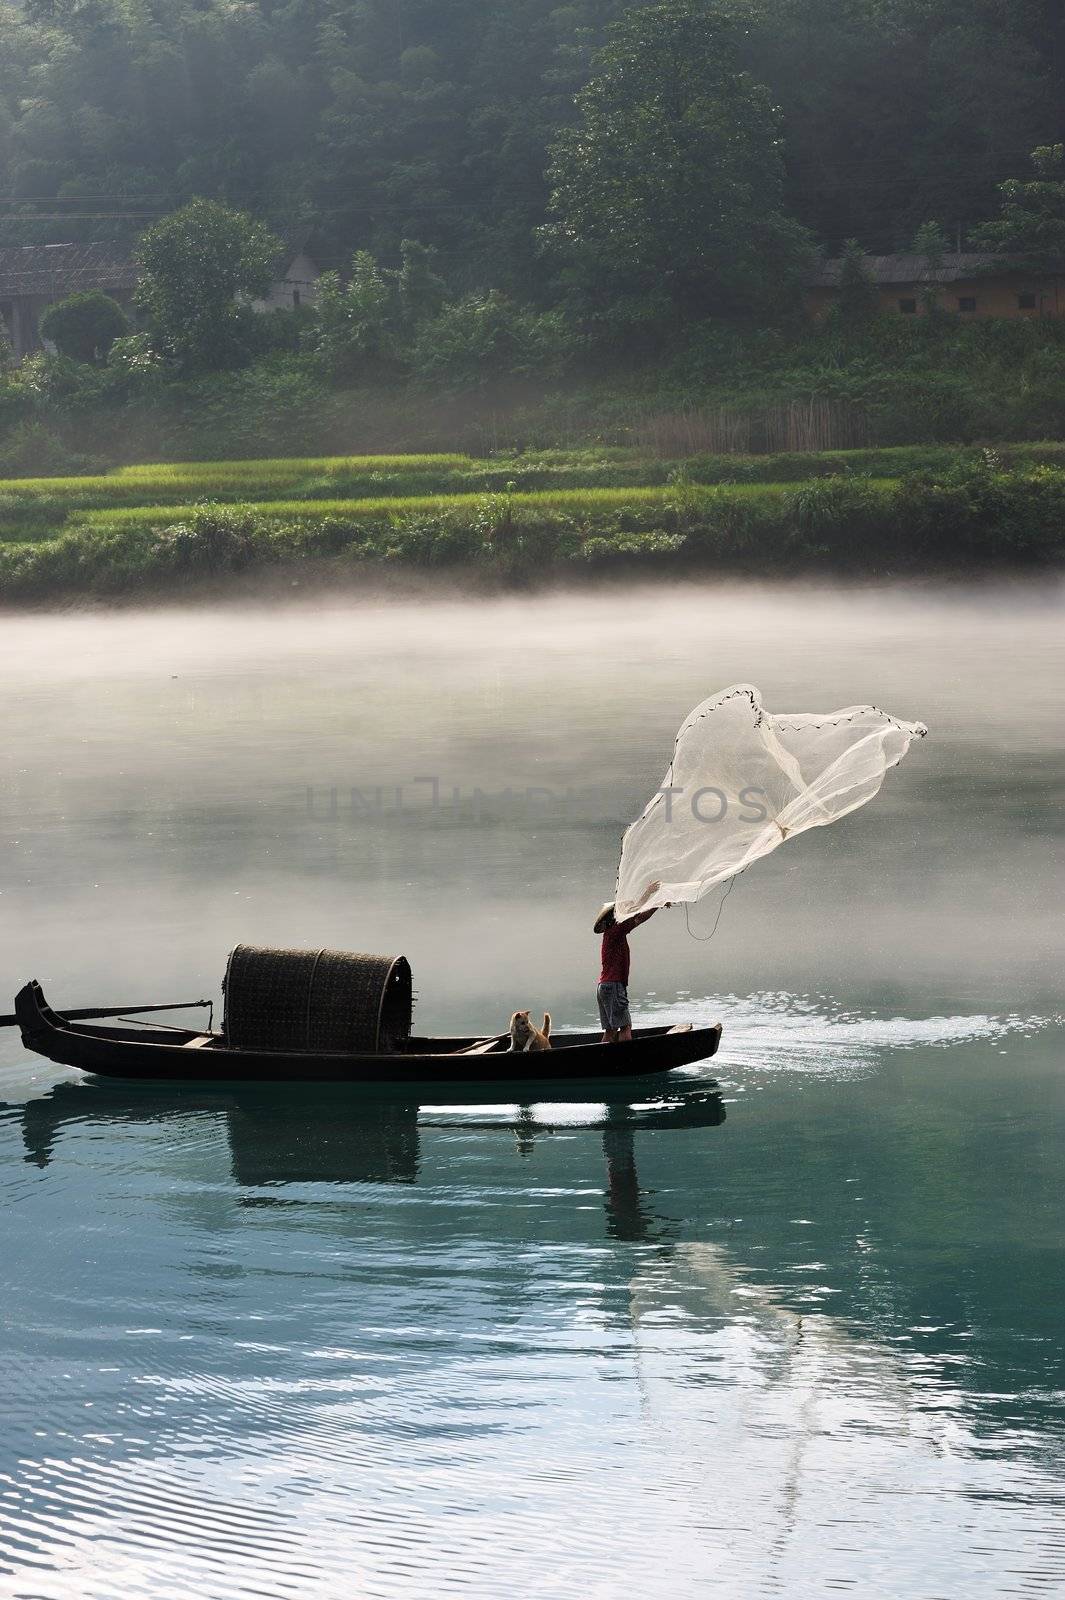 Fisherman casting net on river by raywoo